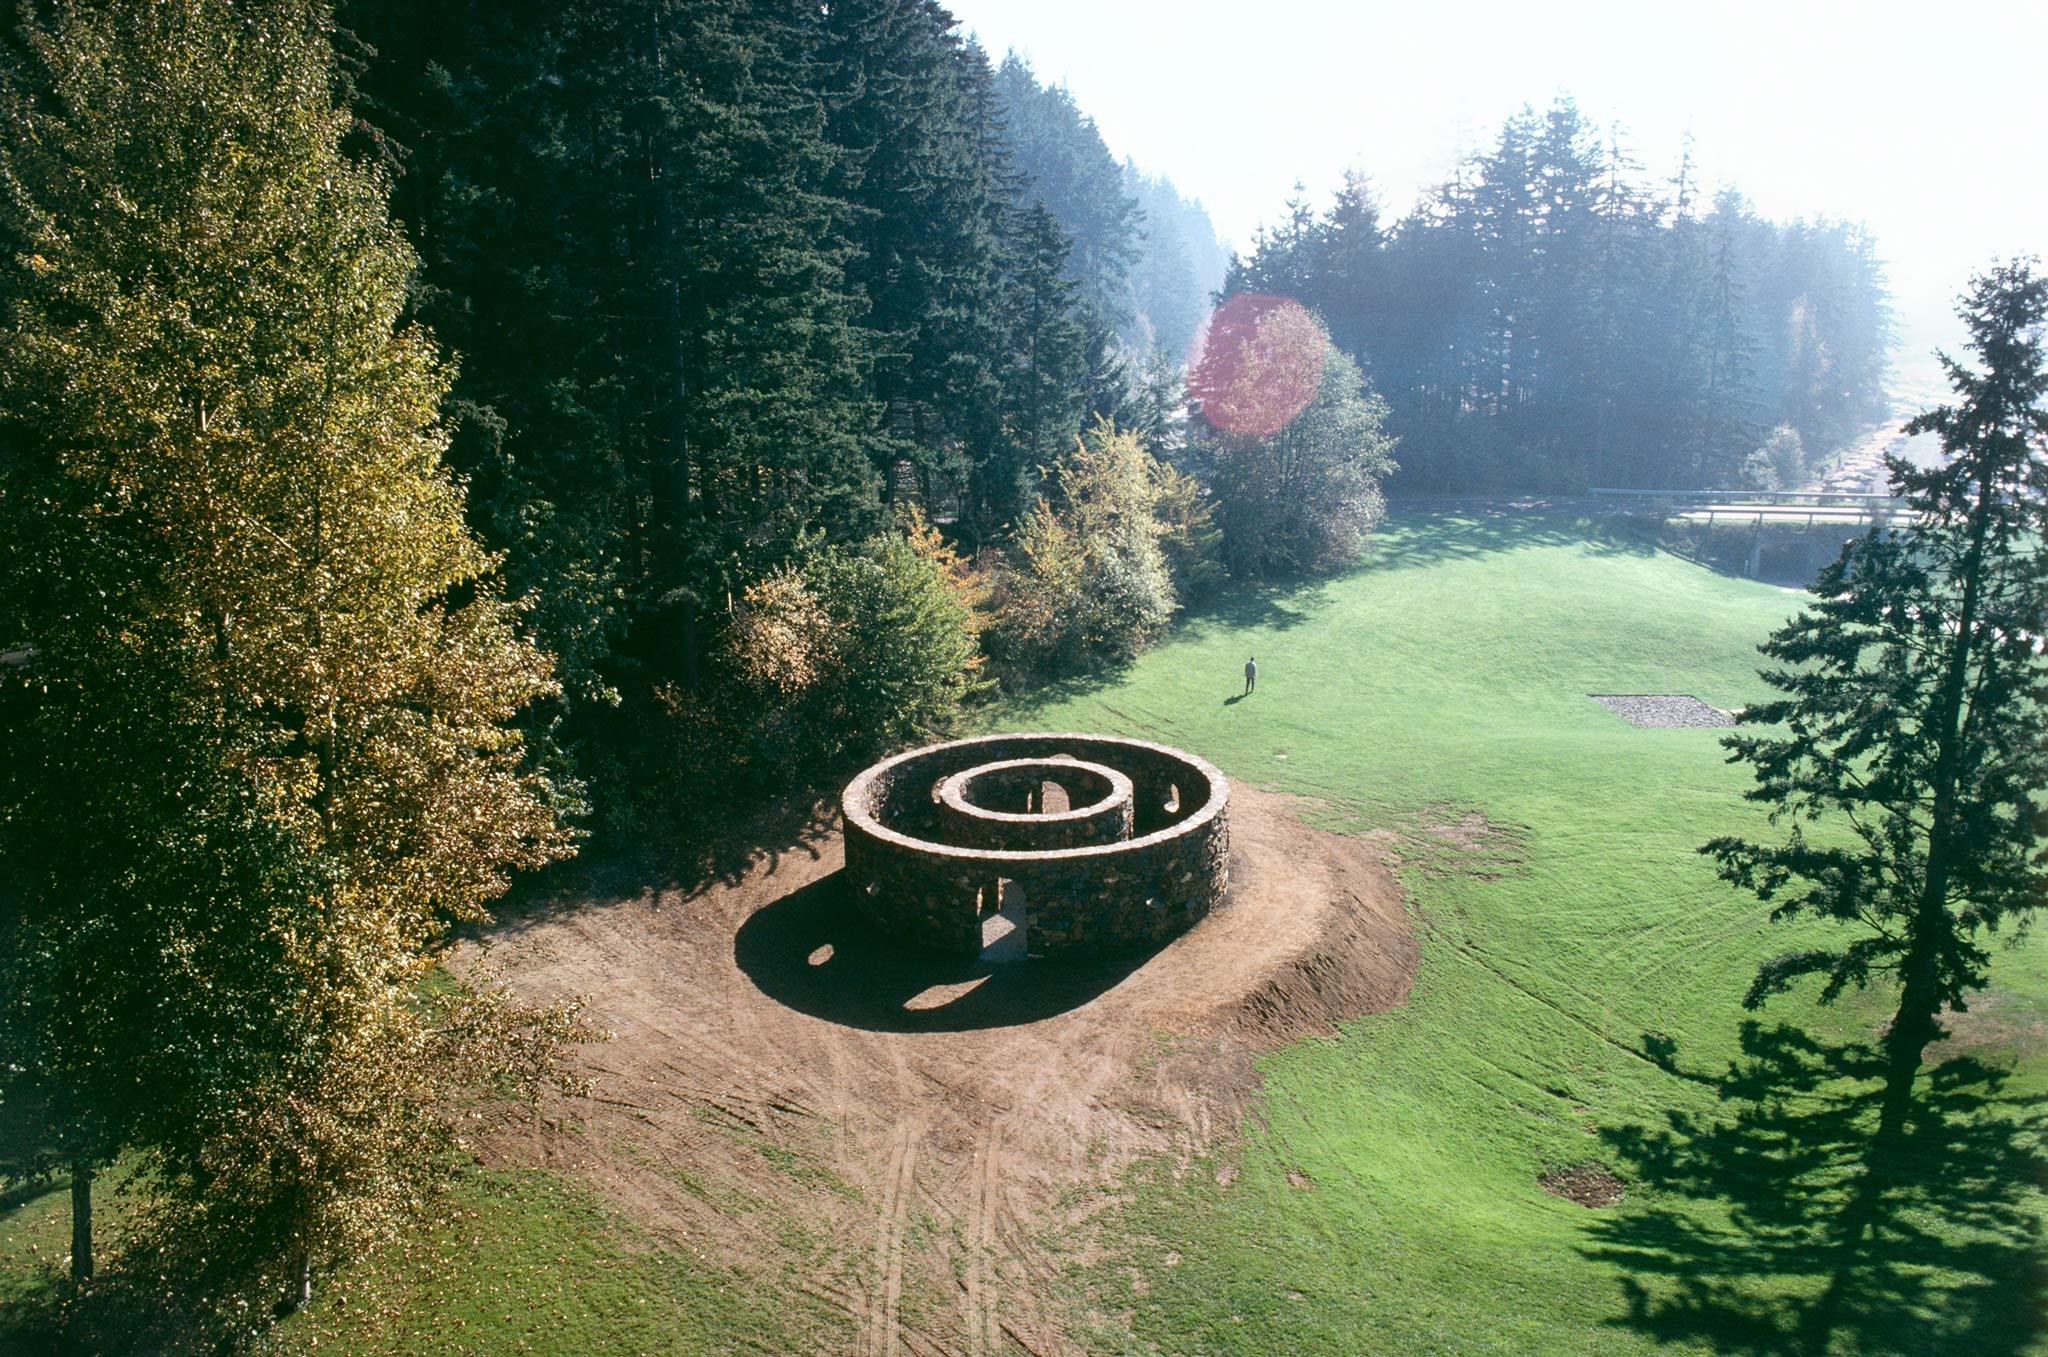 An aerial view of two concentric circular stone walls with the forest surrounding on the left and grass on the right.